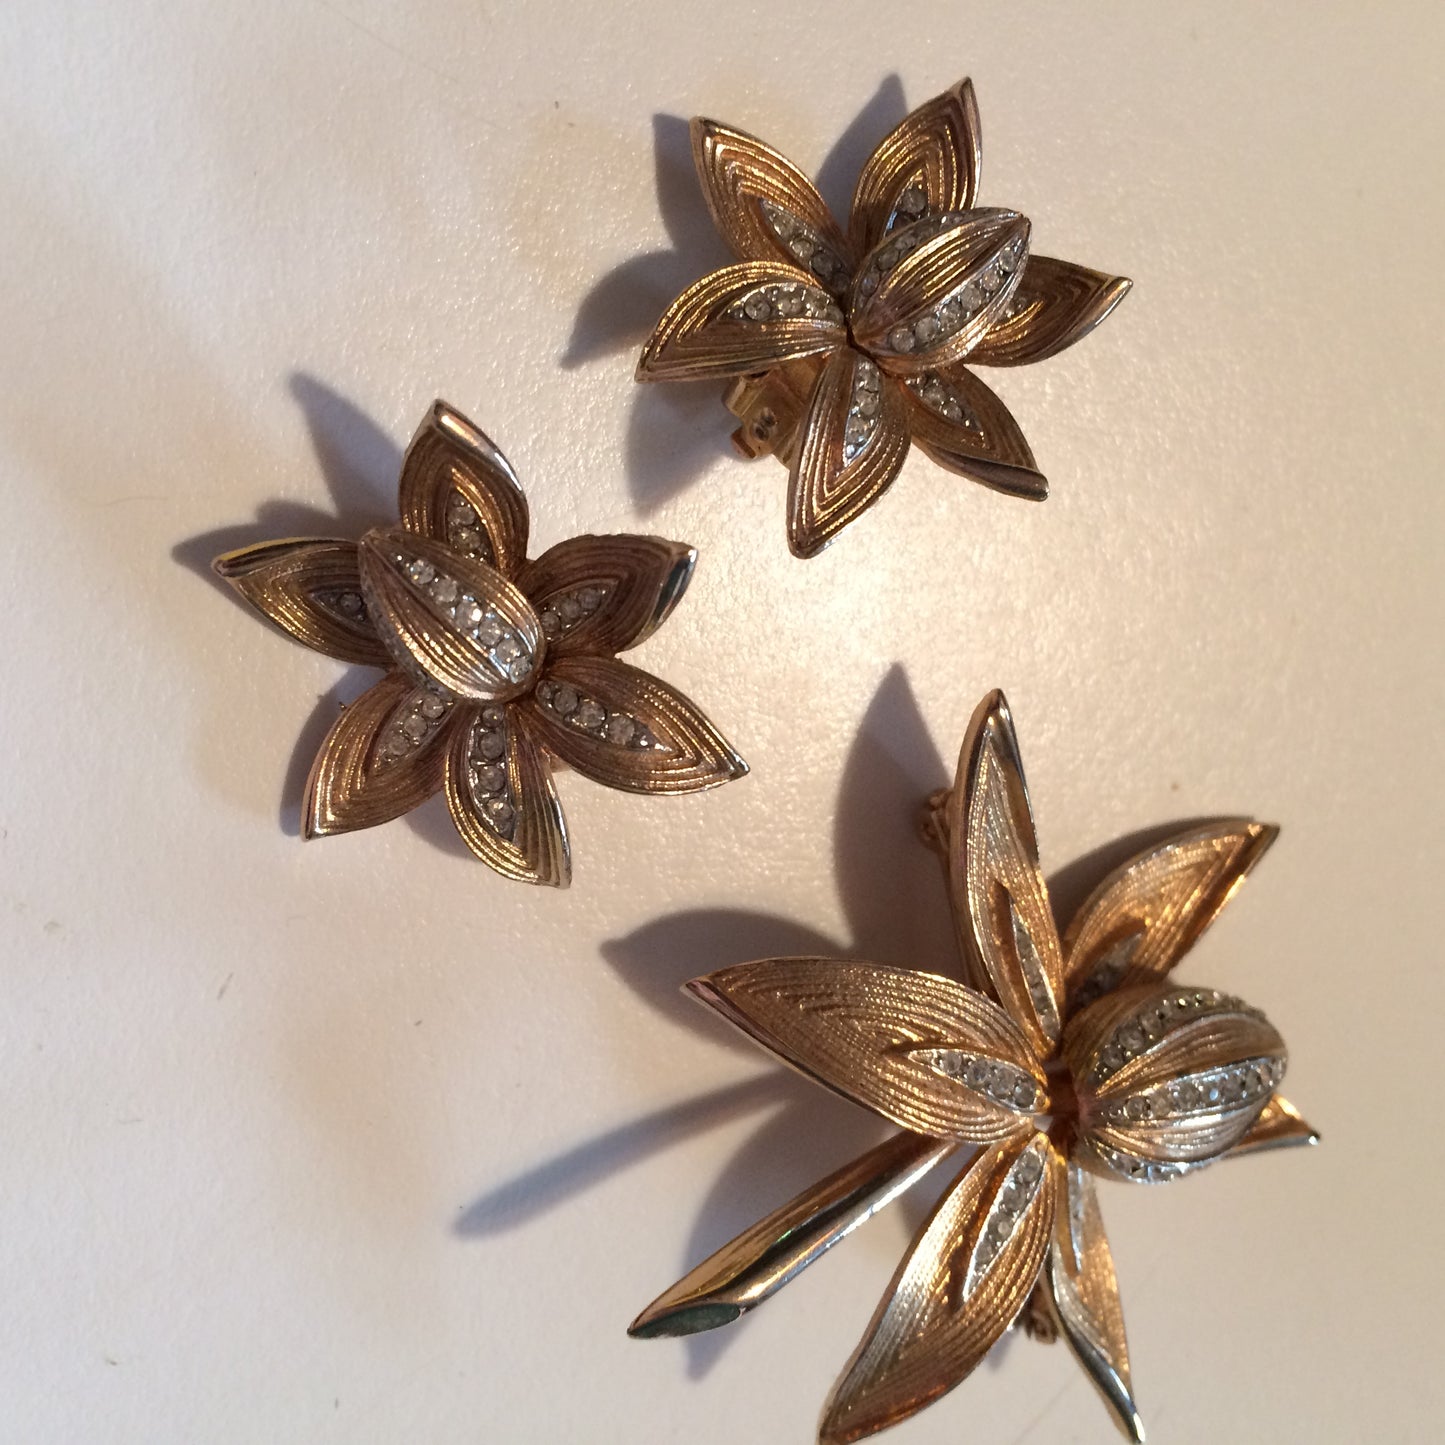 Golden Orchid Rhinestone Adorned Brooch and Earrings Set circa 1940s